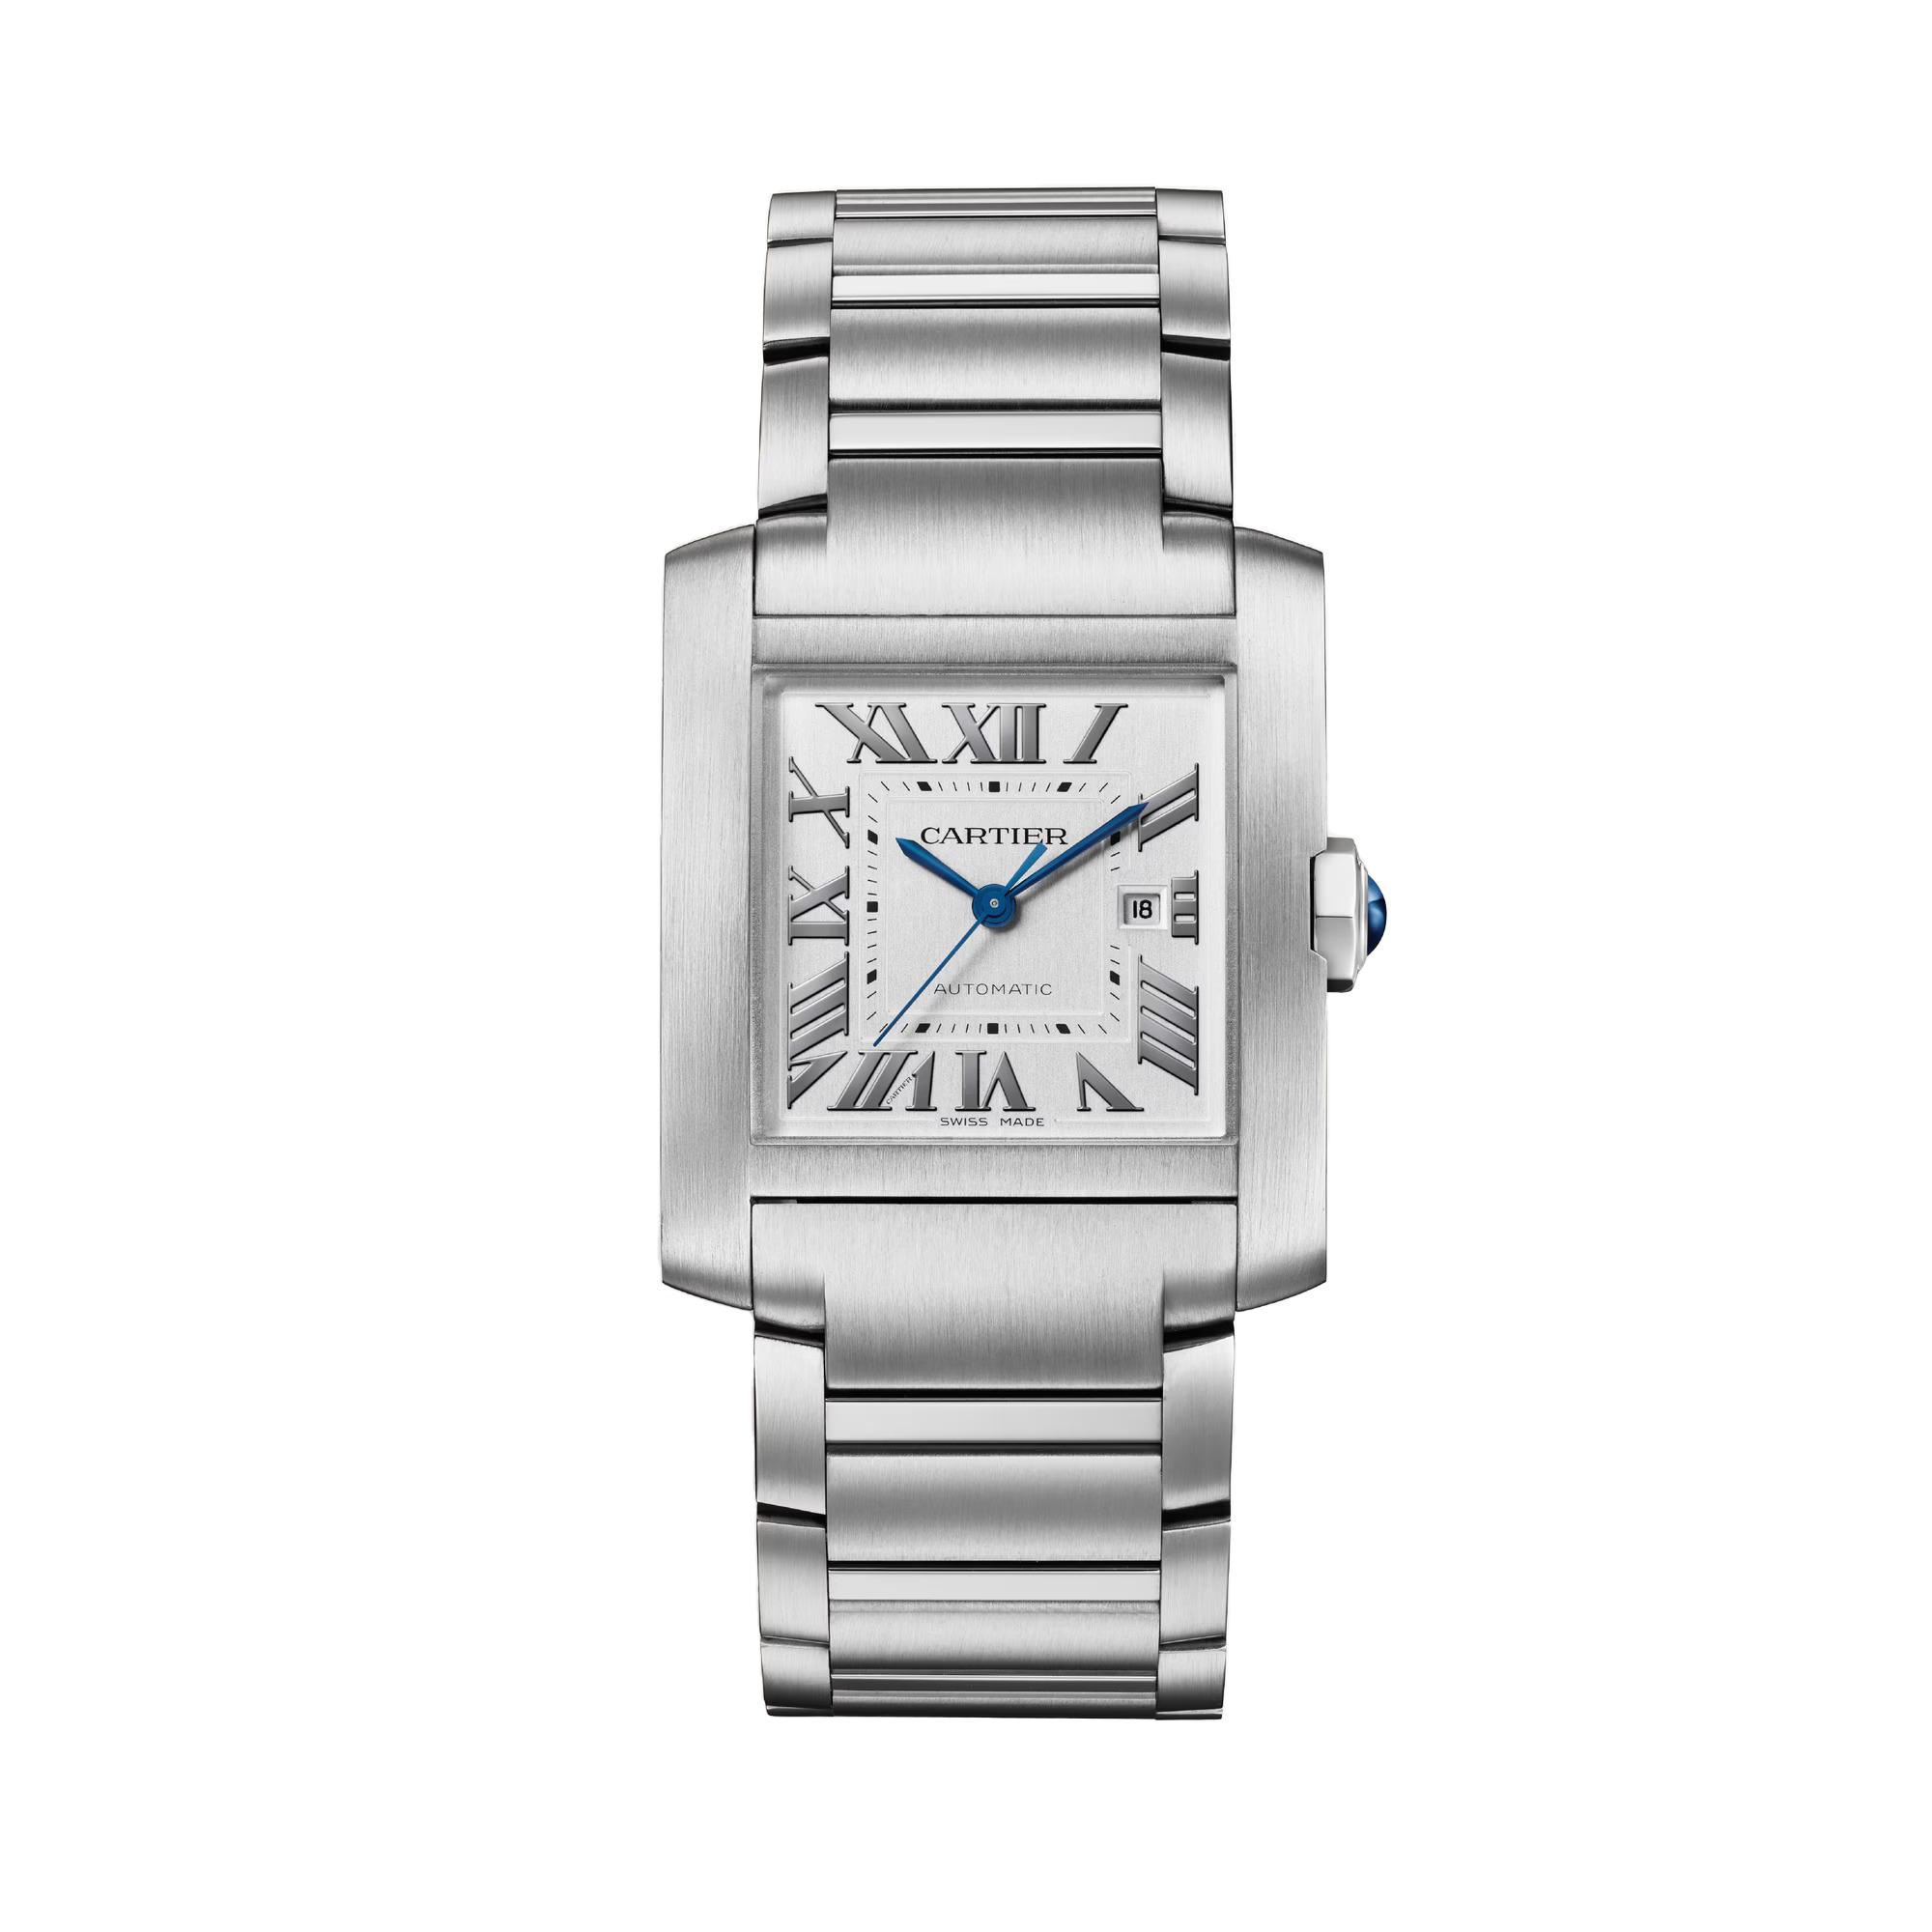 Cartier Tank Francaise Watch, size large